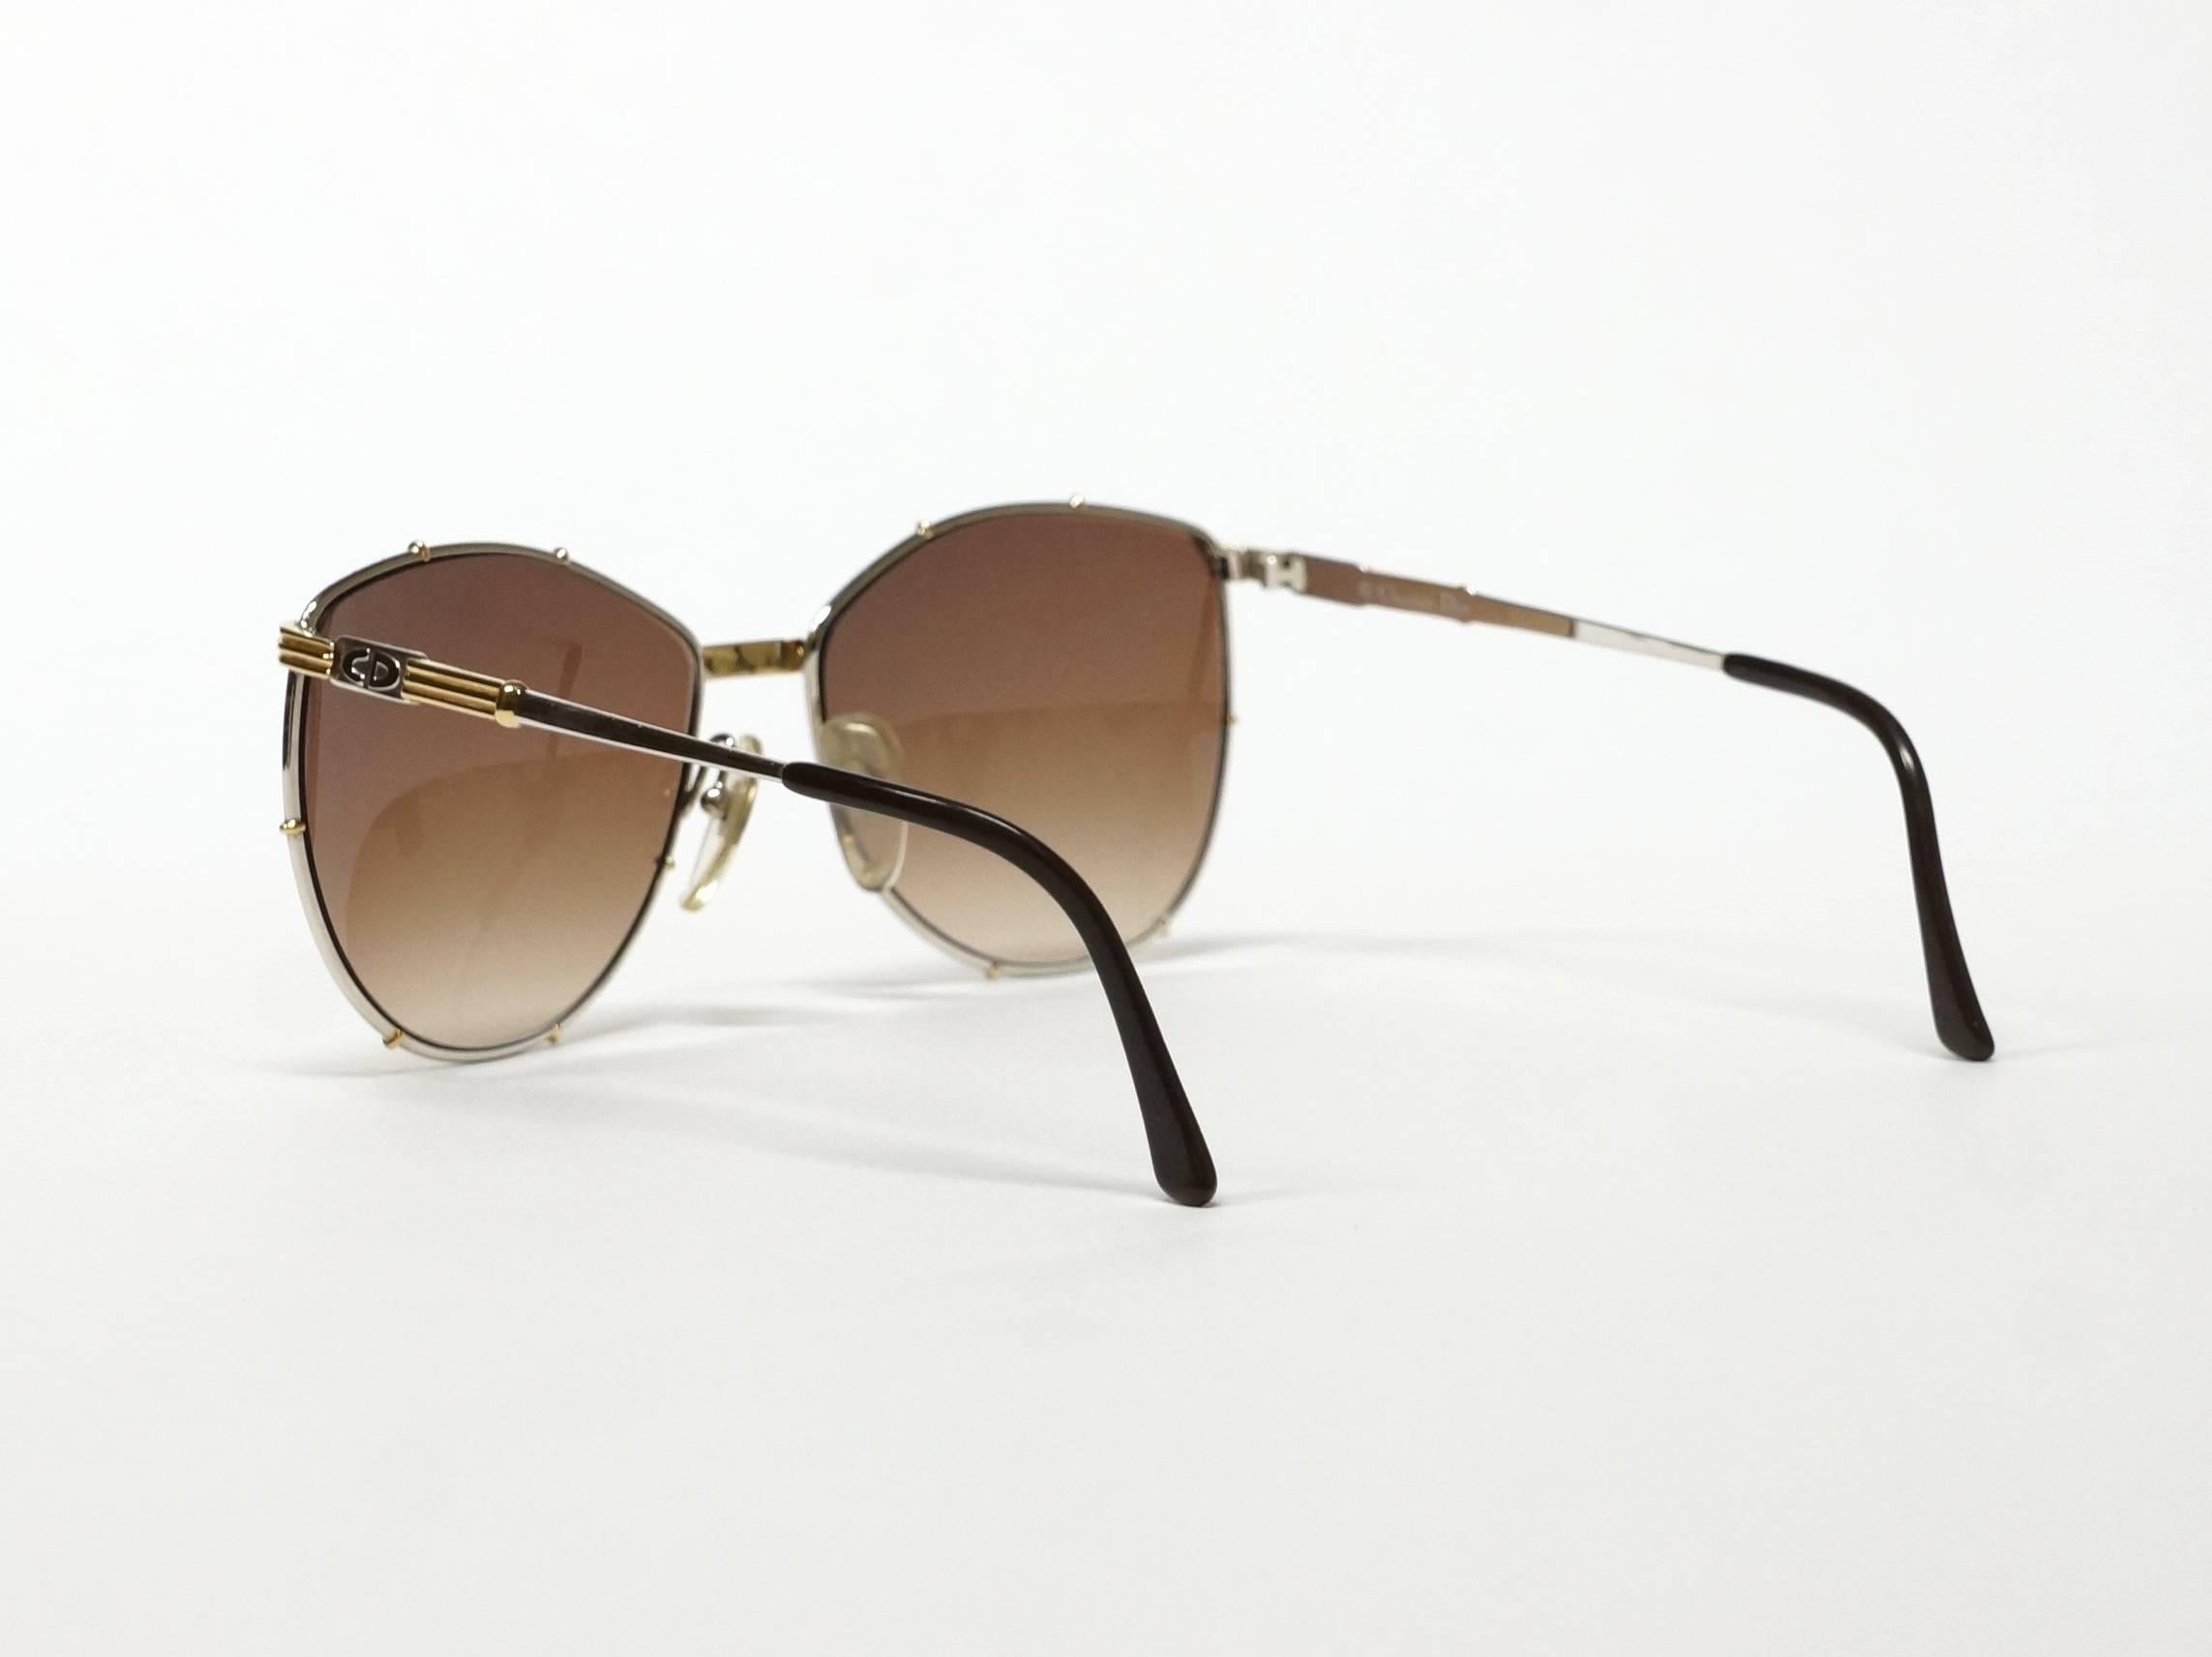 Vintage Christian Dior Bicolor Metal Sunglasses in New Old Stock Condition In New Condition For Sale In s' Heer Arendskerke, Zeeland